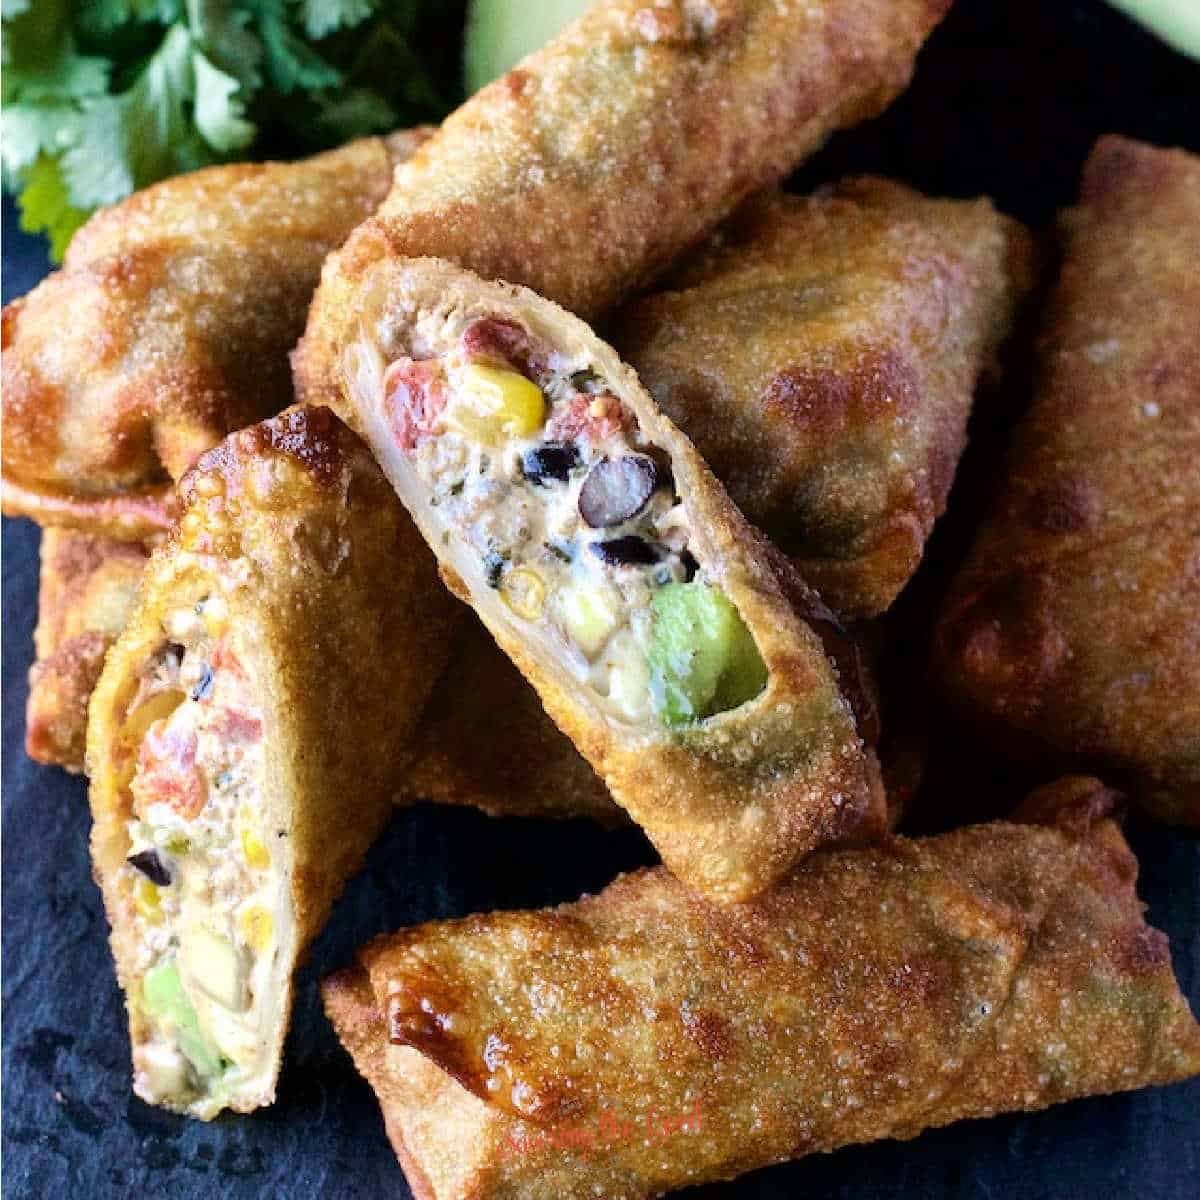 fried tex mex egg roll with beeg, cheese, corn, tomatoes, cream cheese black beans, cut open on the bias to show texture. Sitting on a pile of the rest of the the golden egg rolls